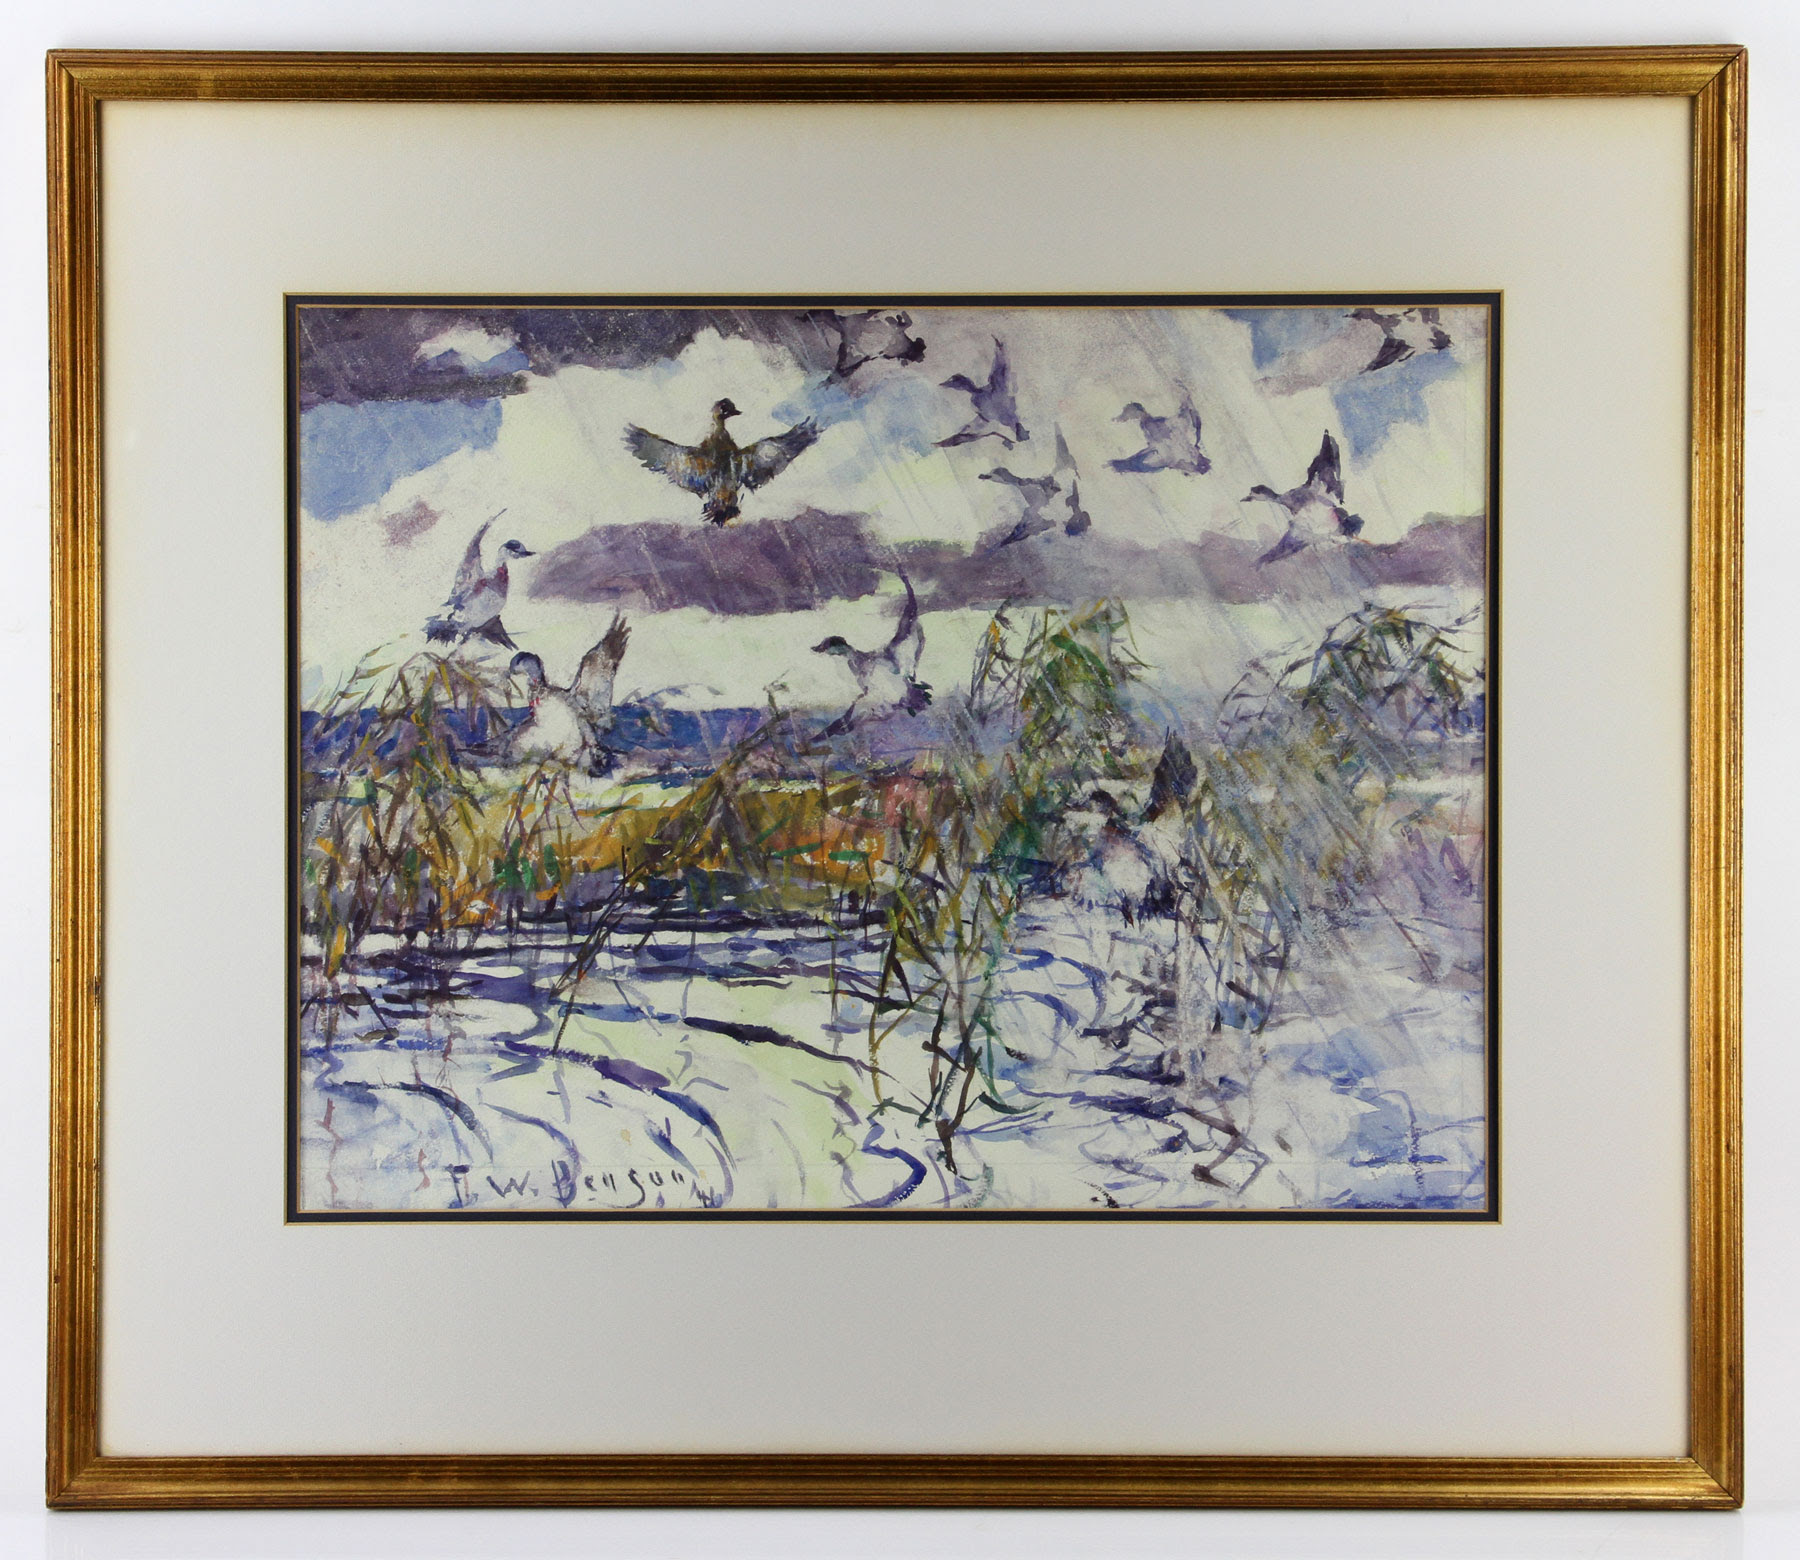 ‘A Good Day For Ducks’ watercolor by Frank W. Benson. Kaminski Auctions image